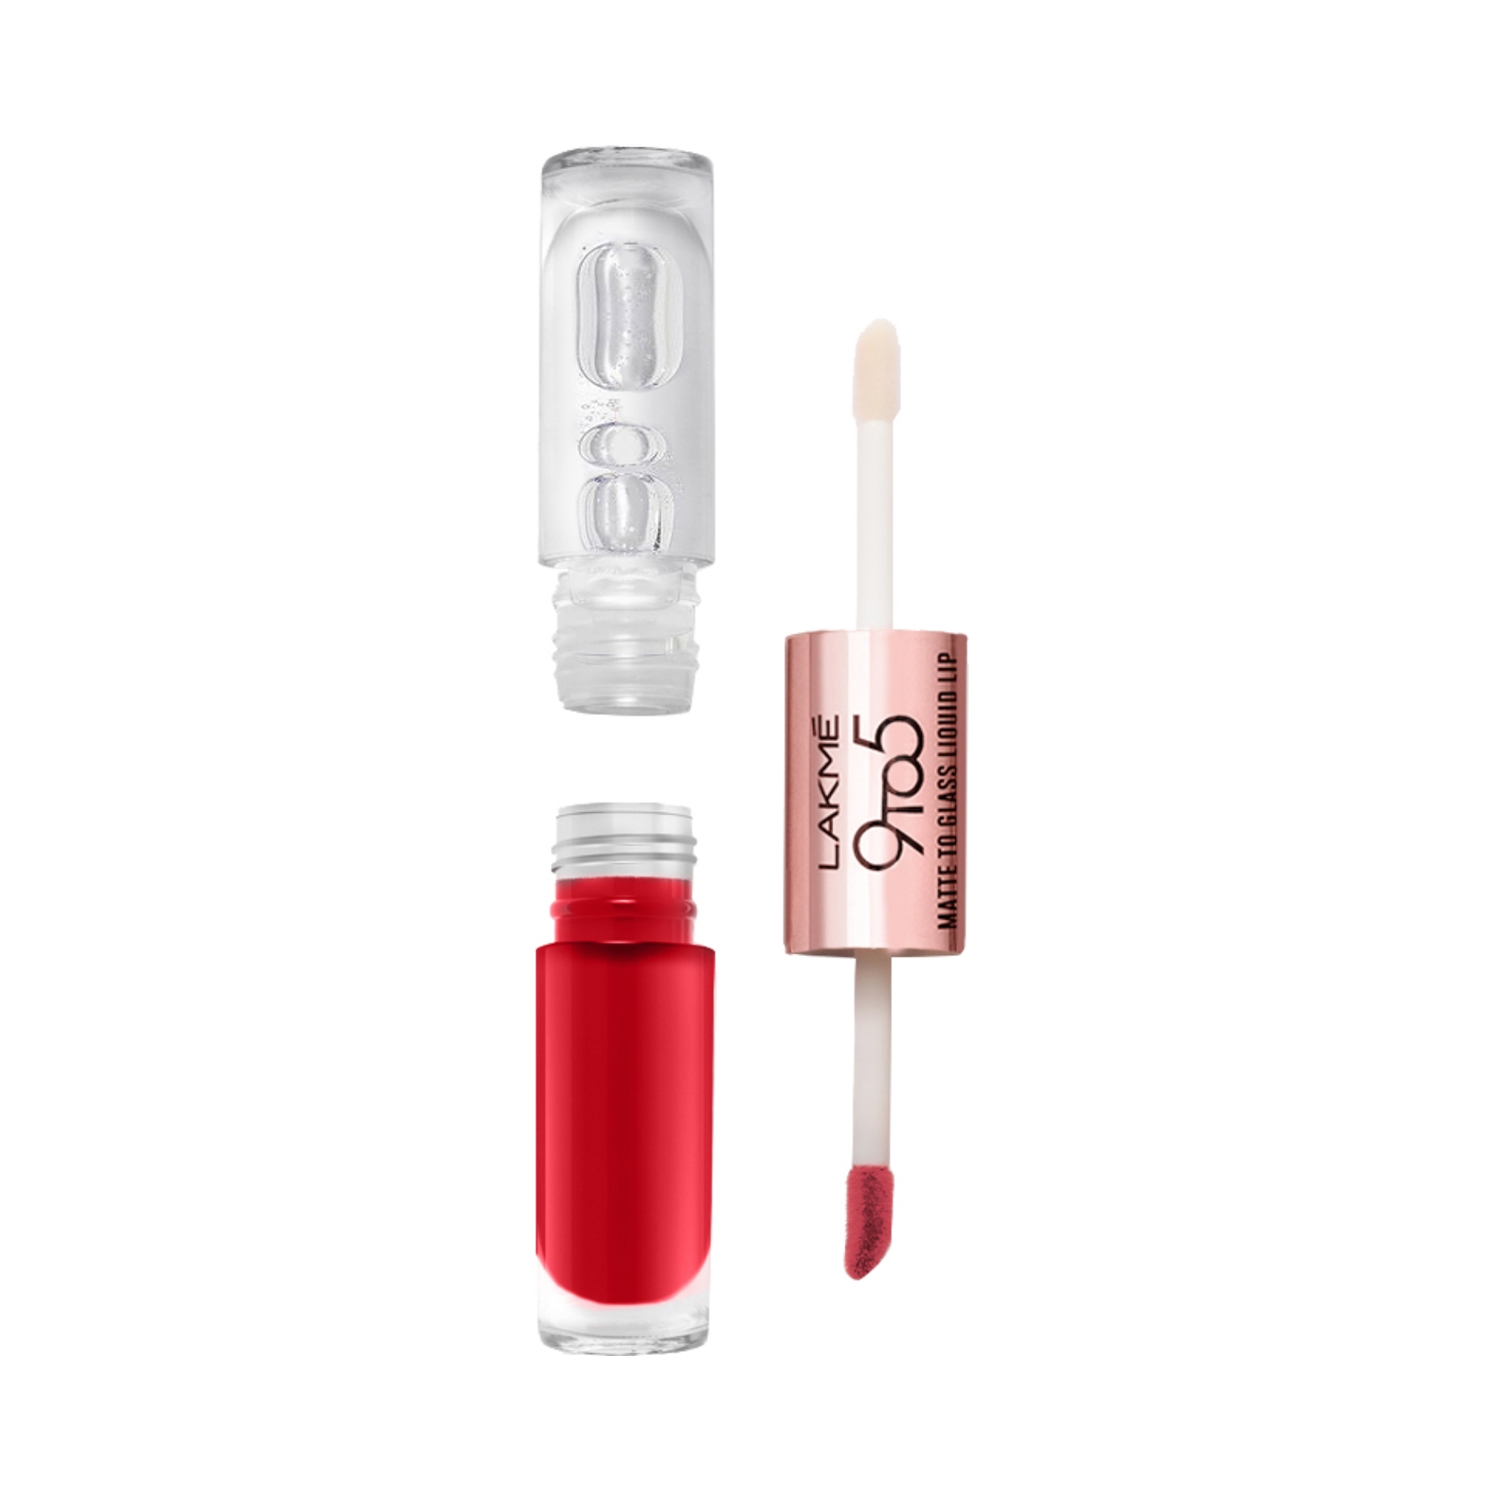 Lakme | Lakme 9 To 5 Matte To Glass Liquid Lip Color - Passion Pink (7.6ml)